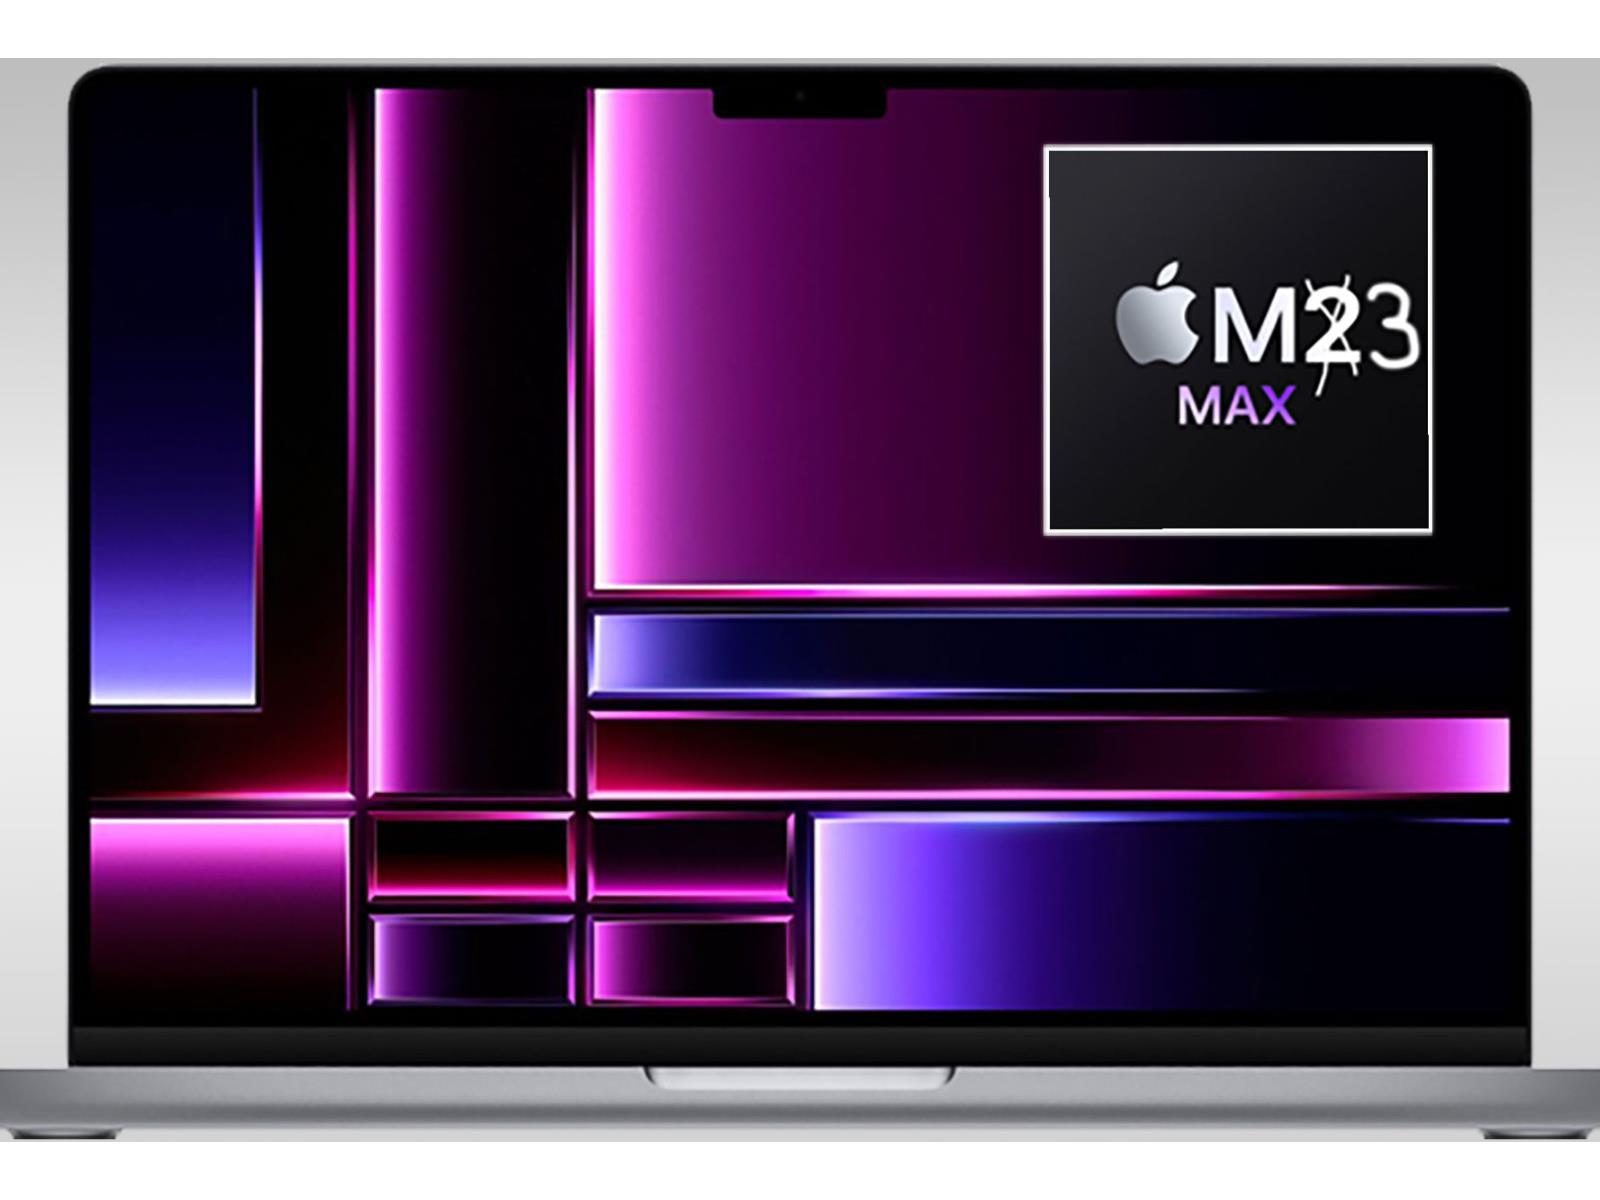 Apple's M3 Max MacBook Pro rumored to have 40 GPU cores and up to 48GB of  RAM - The Verge